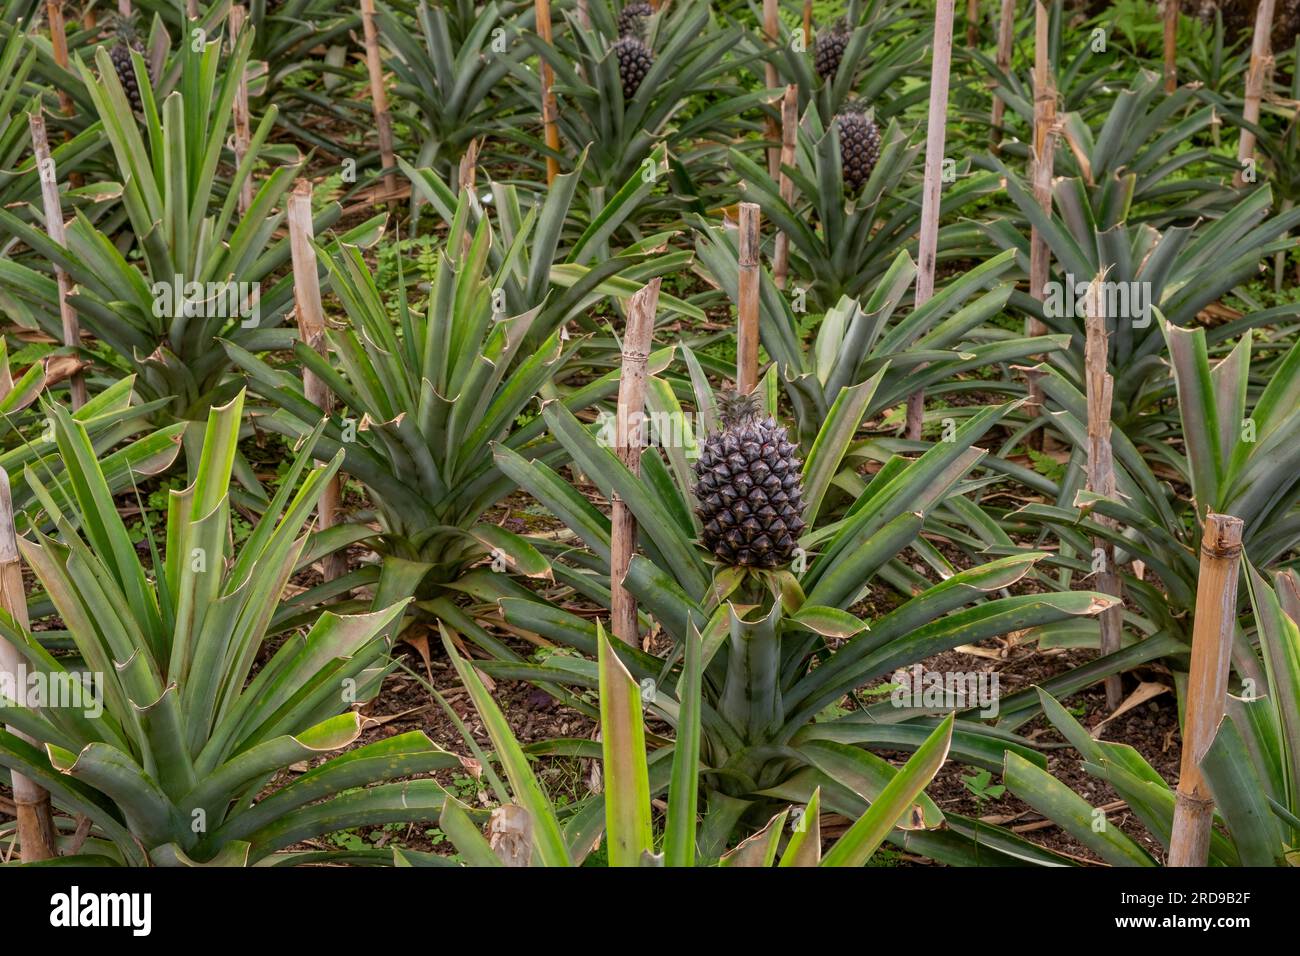 Pineapple plantation in the Azores. Pineapples growing in the greenhouse. São Miguel island in the Azores. Stock Photo